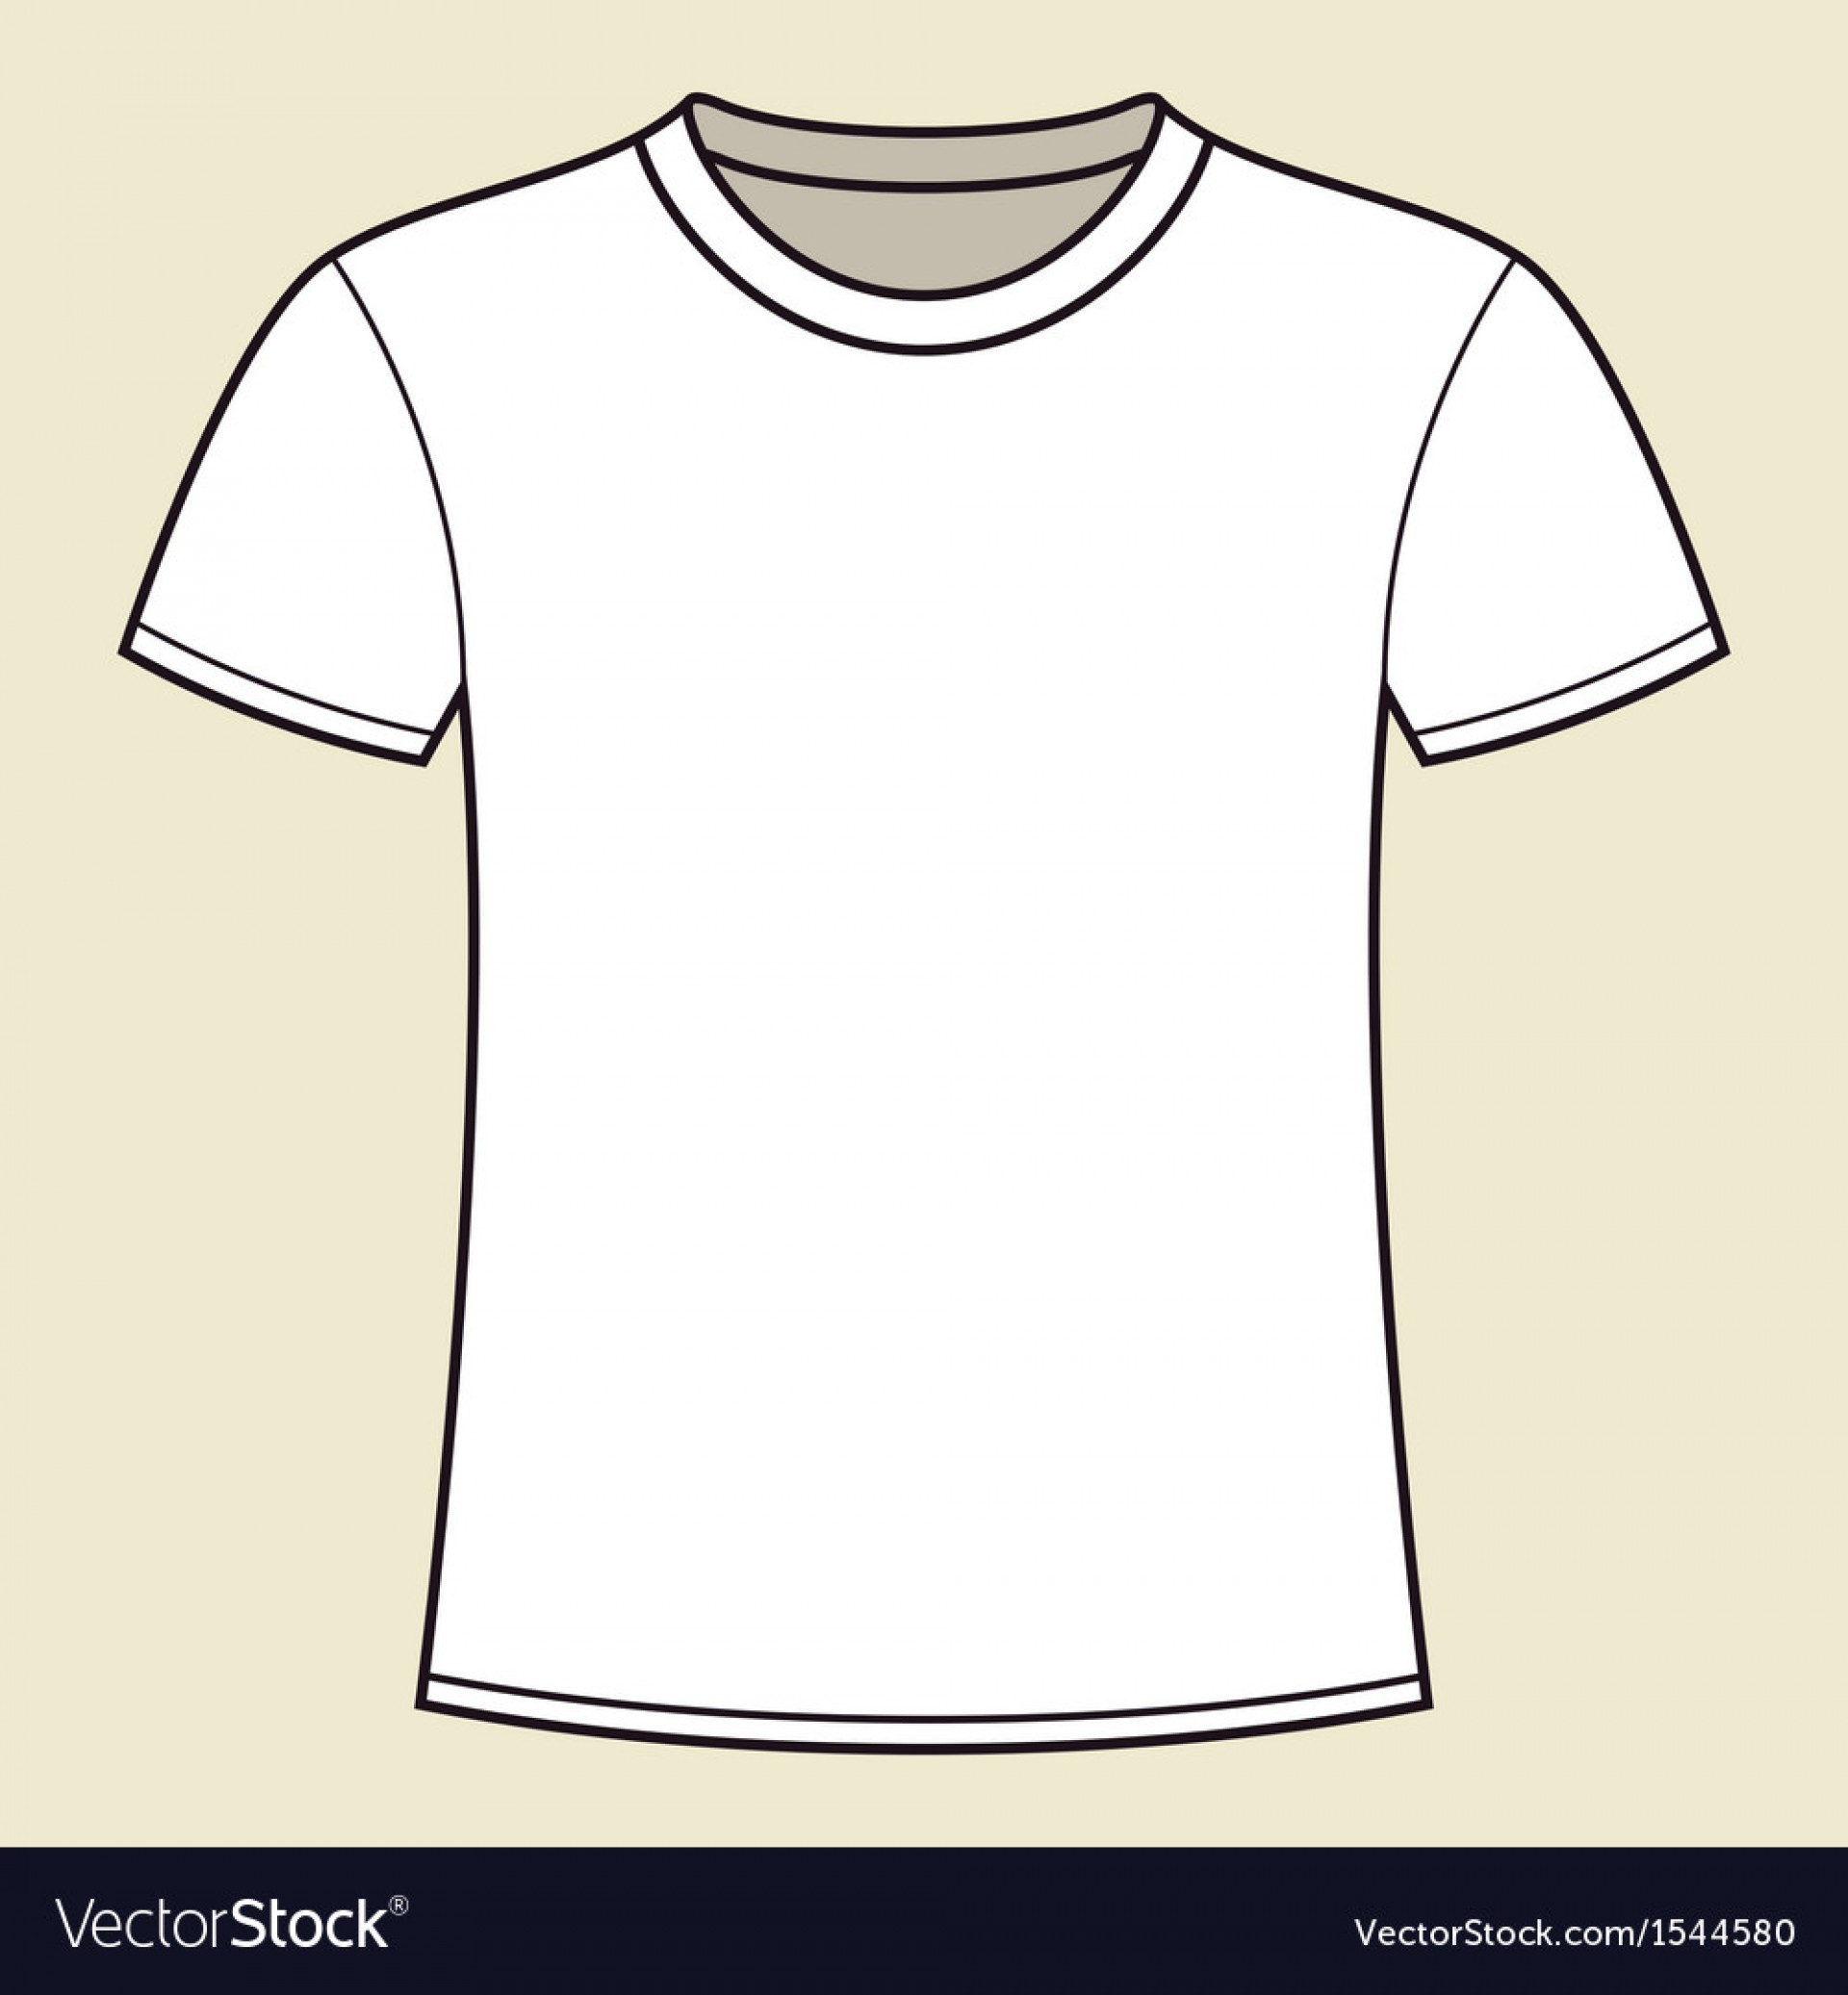 Download Plain T Shirt Vector at Vectorified.com | Collection of Plain T Shirt Vector free for personal use